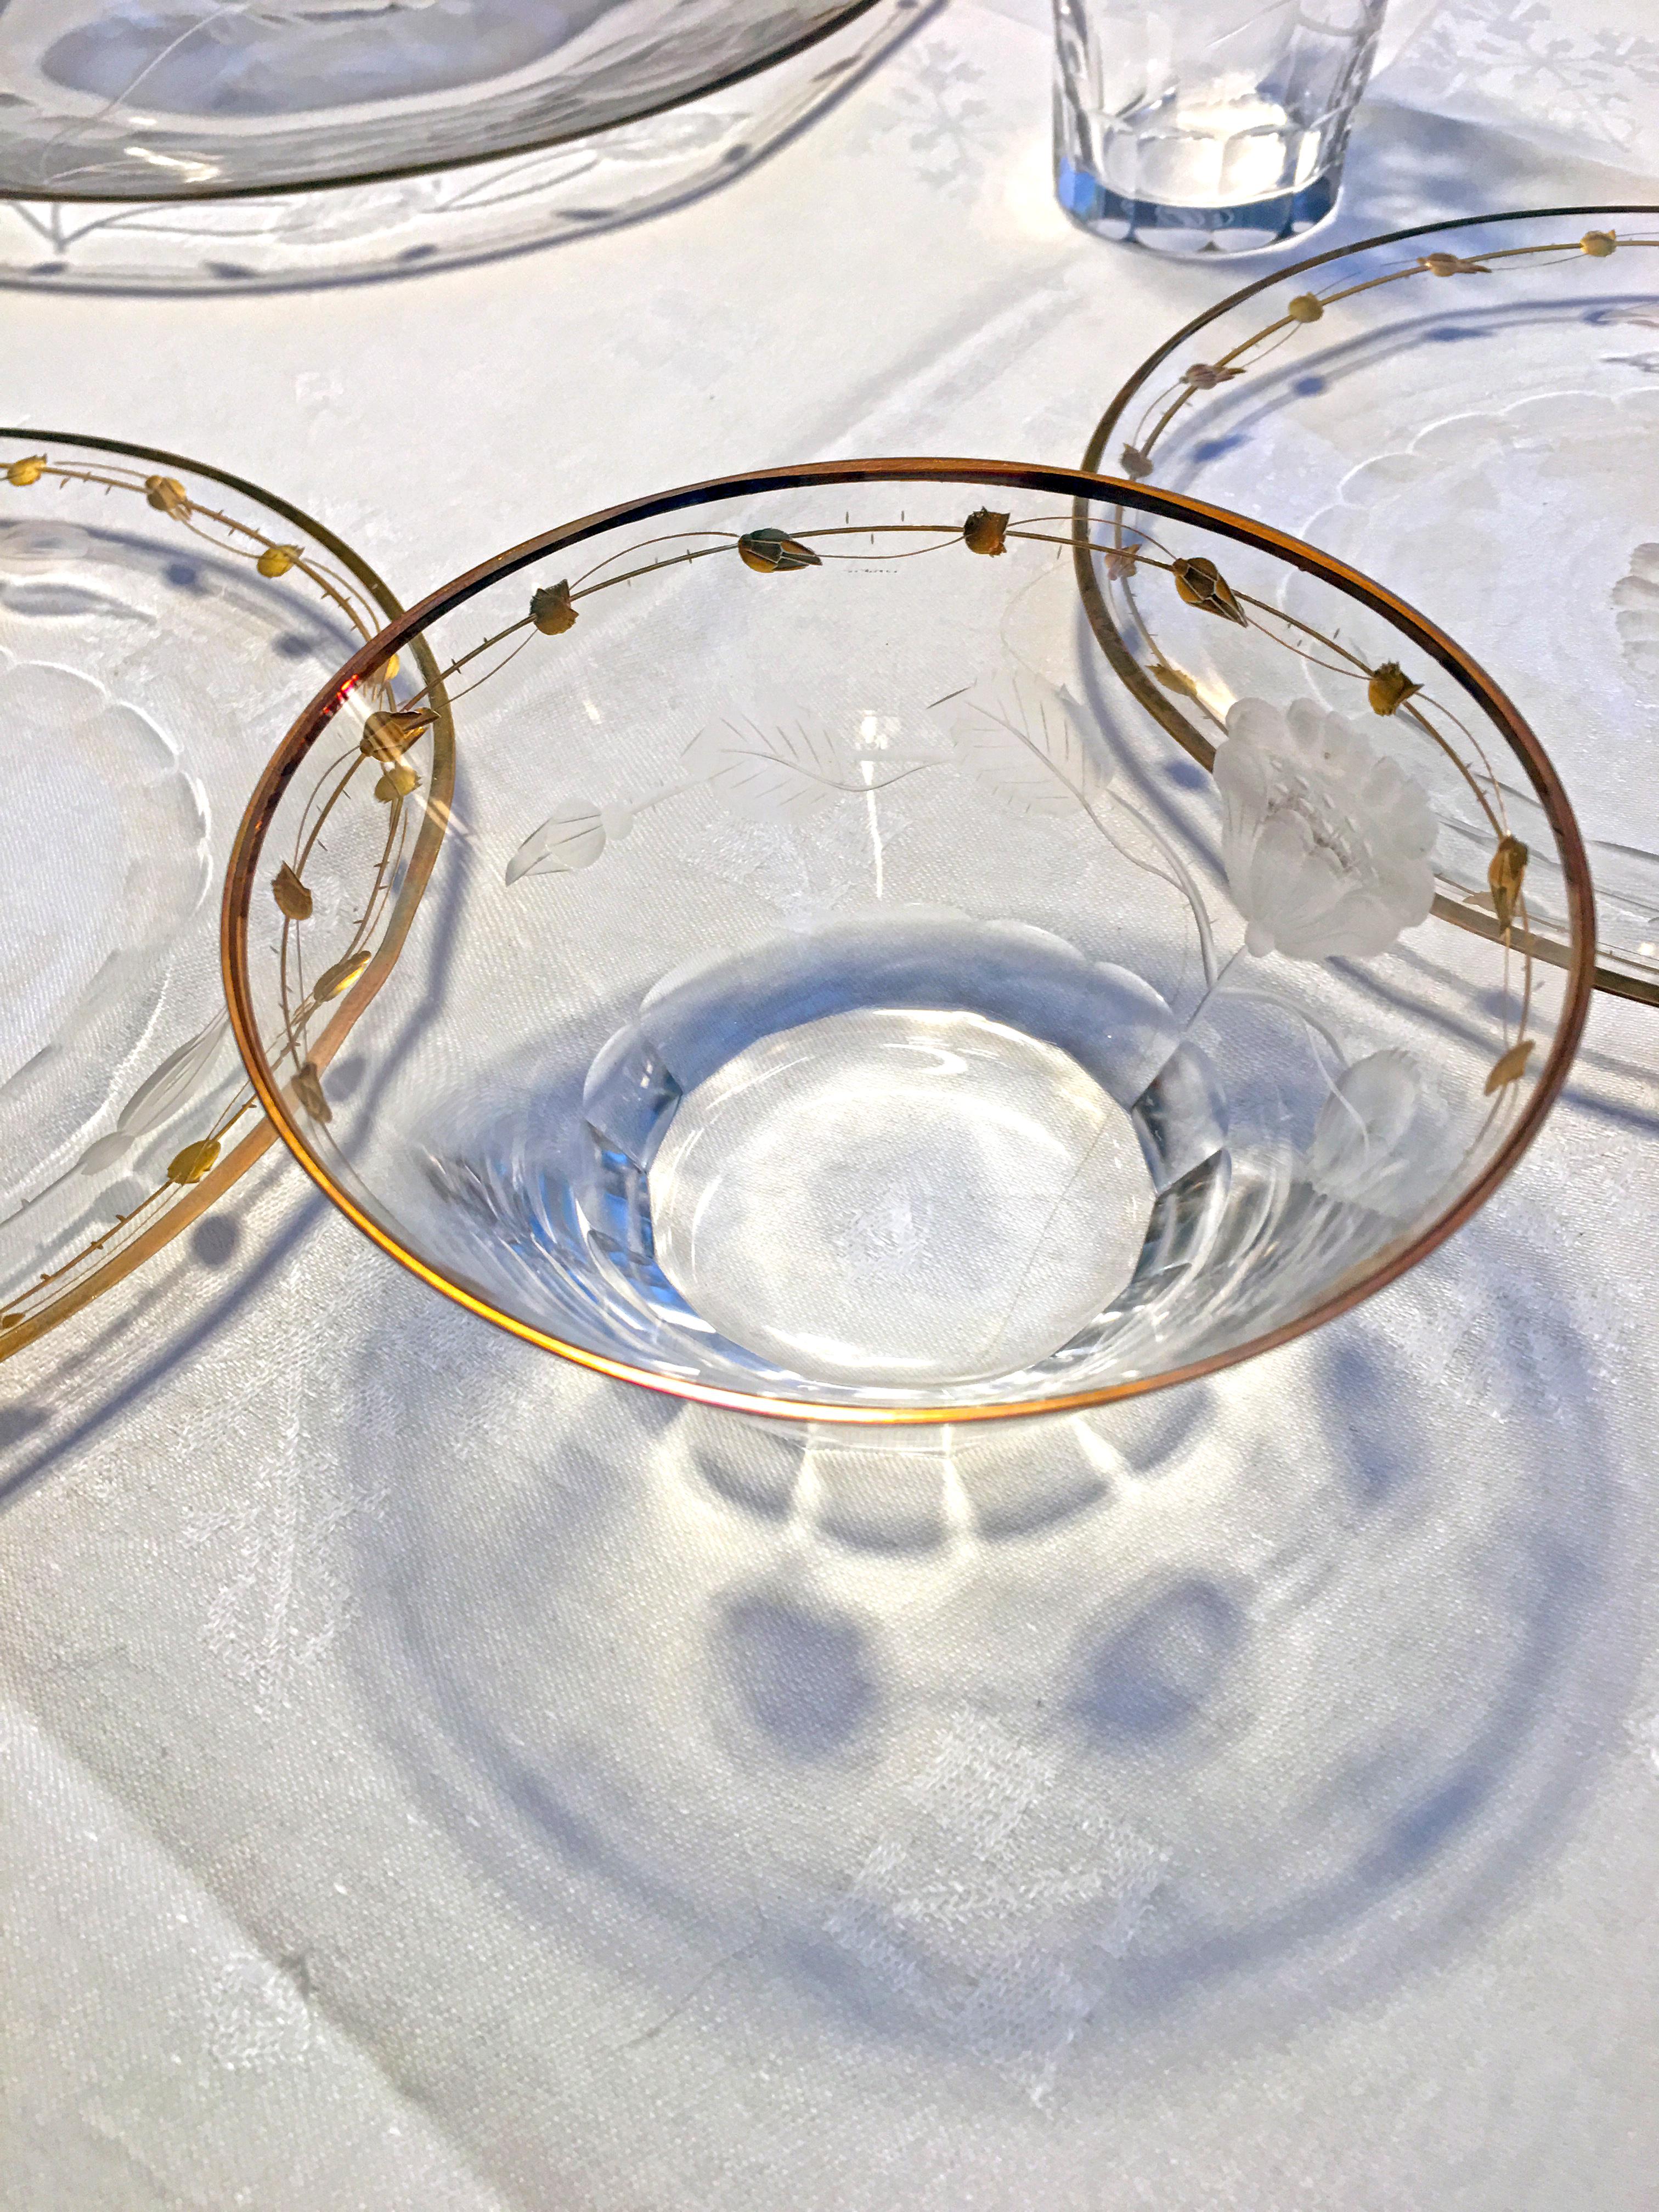 These are 6 rare dessert bowls of hand blown crystal made by Moser in the ever popular Art Nouveau 